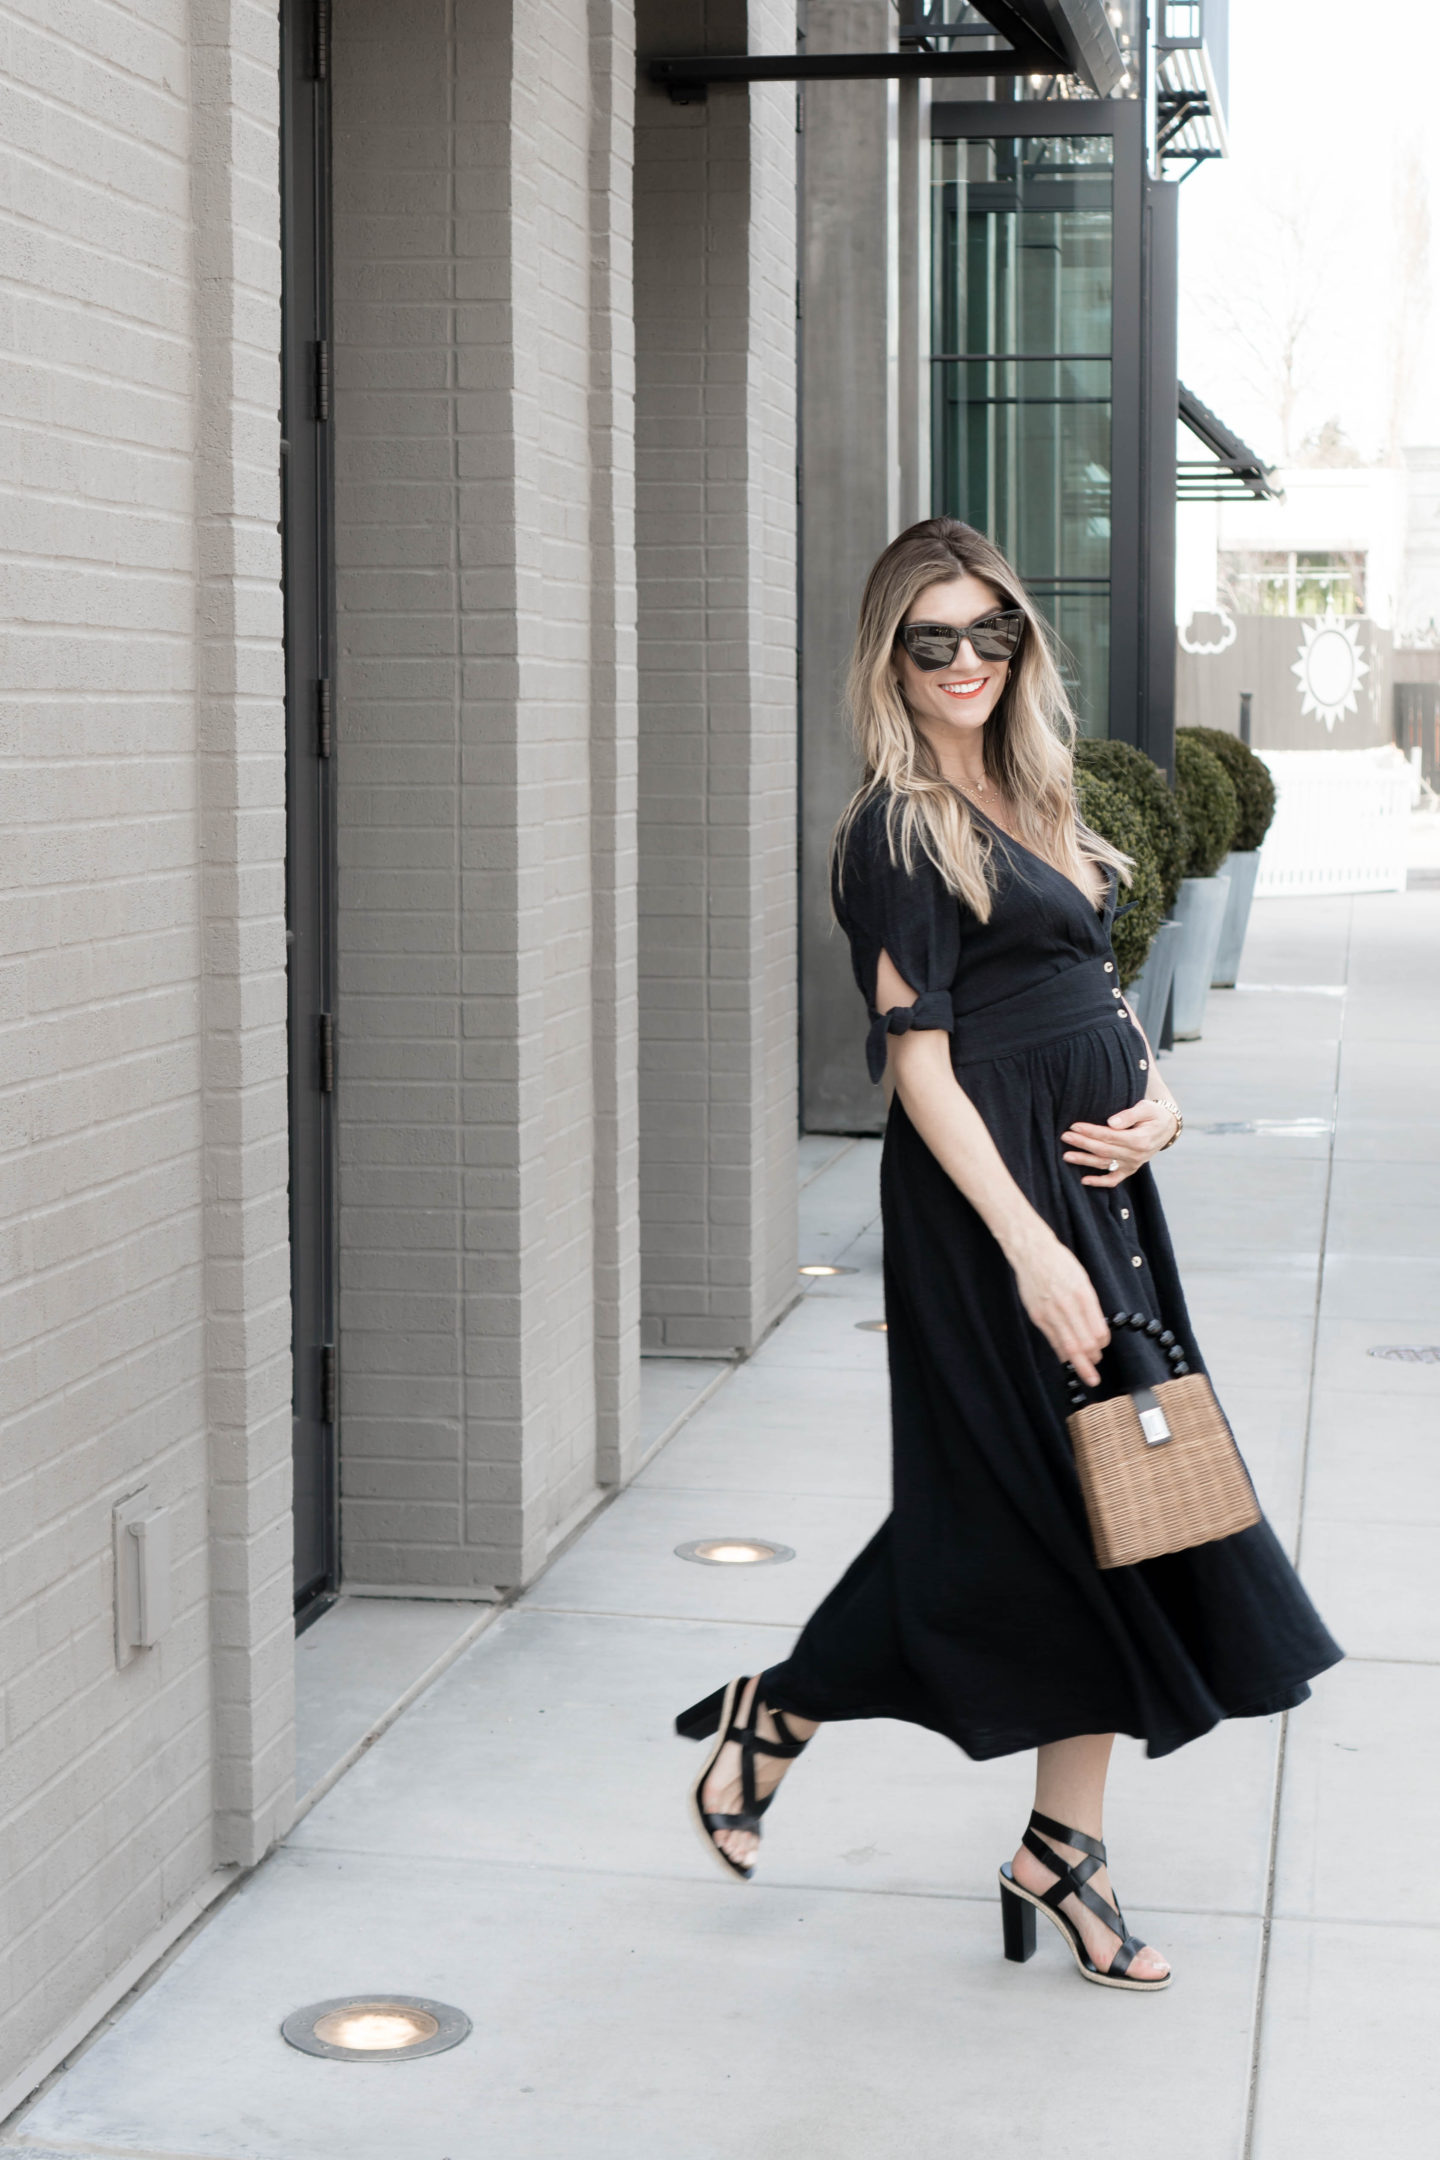 The Grey Edit - Pregnancy Style Tips - Weekend Events - Free People Black Button Down Dress - Styled Out West Collaboration